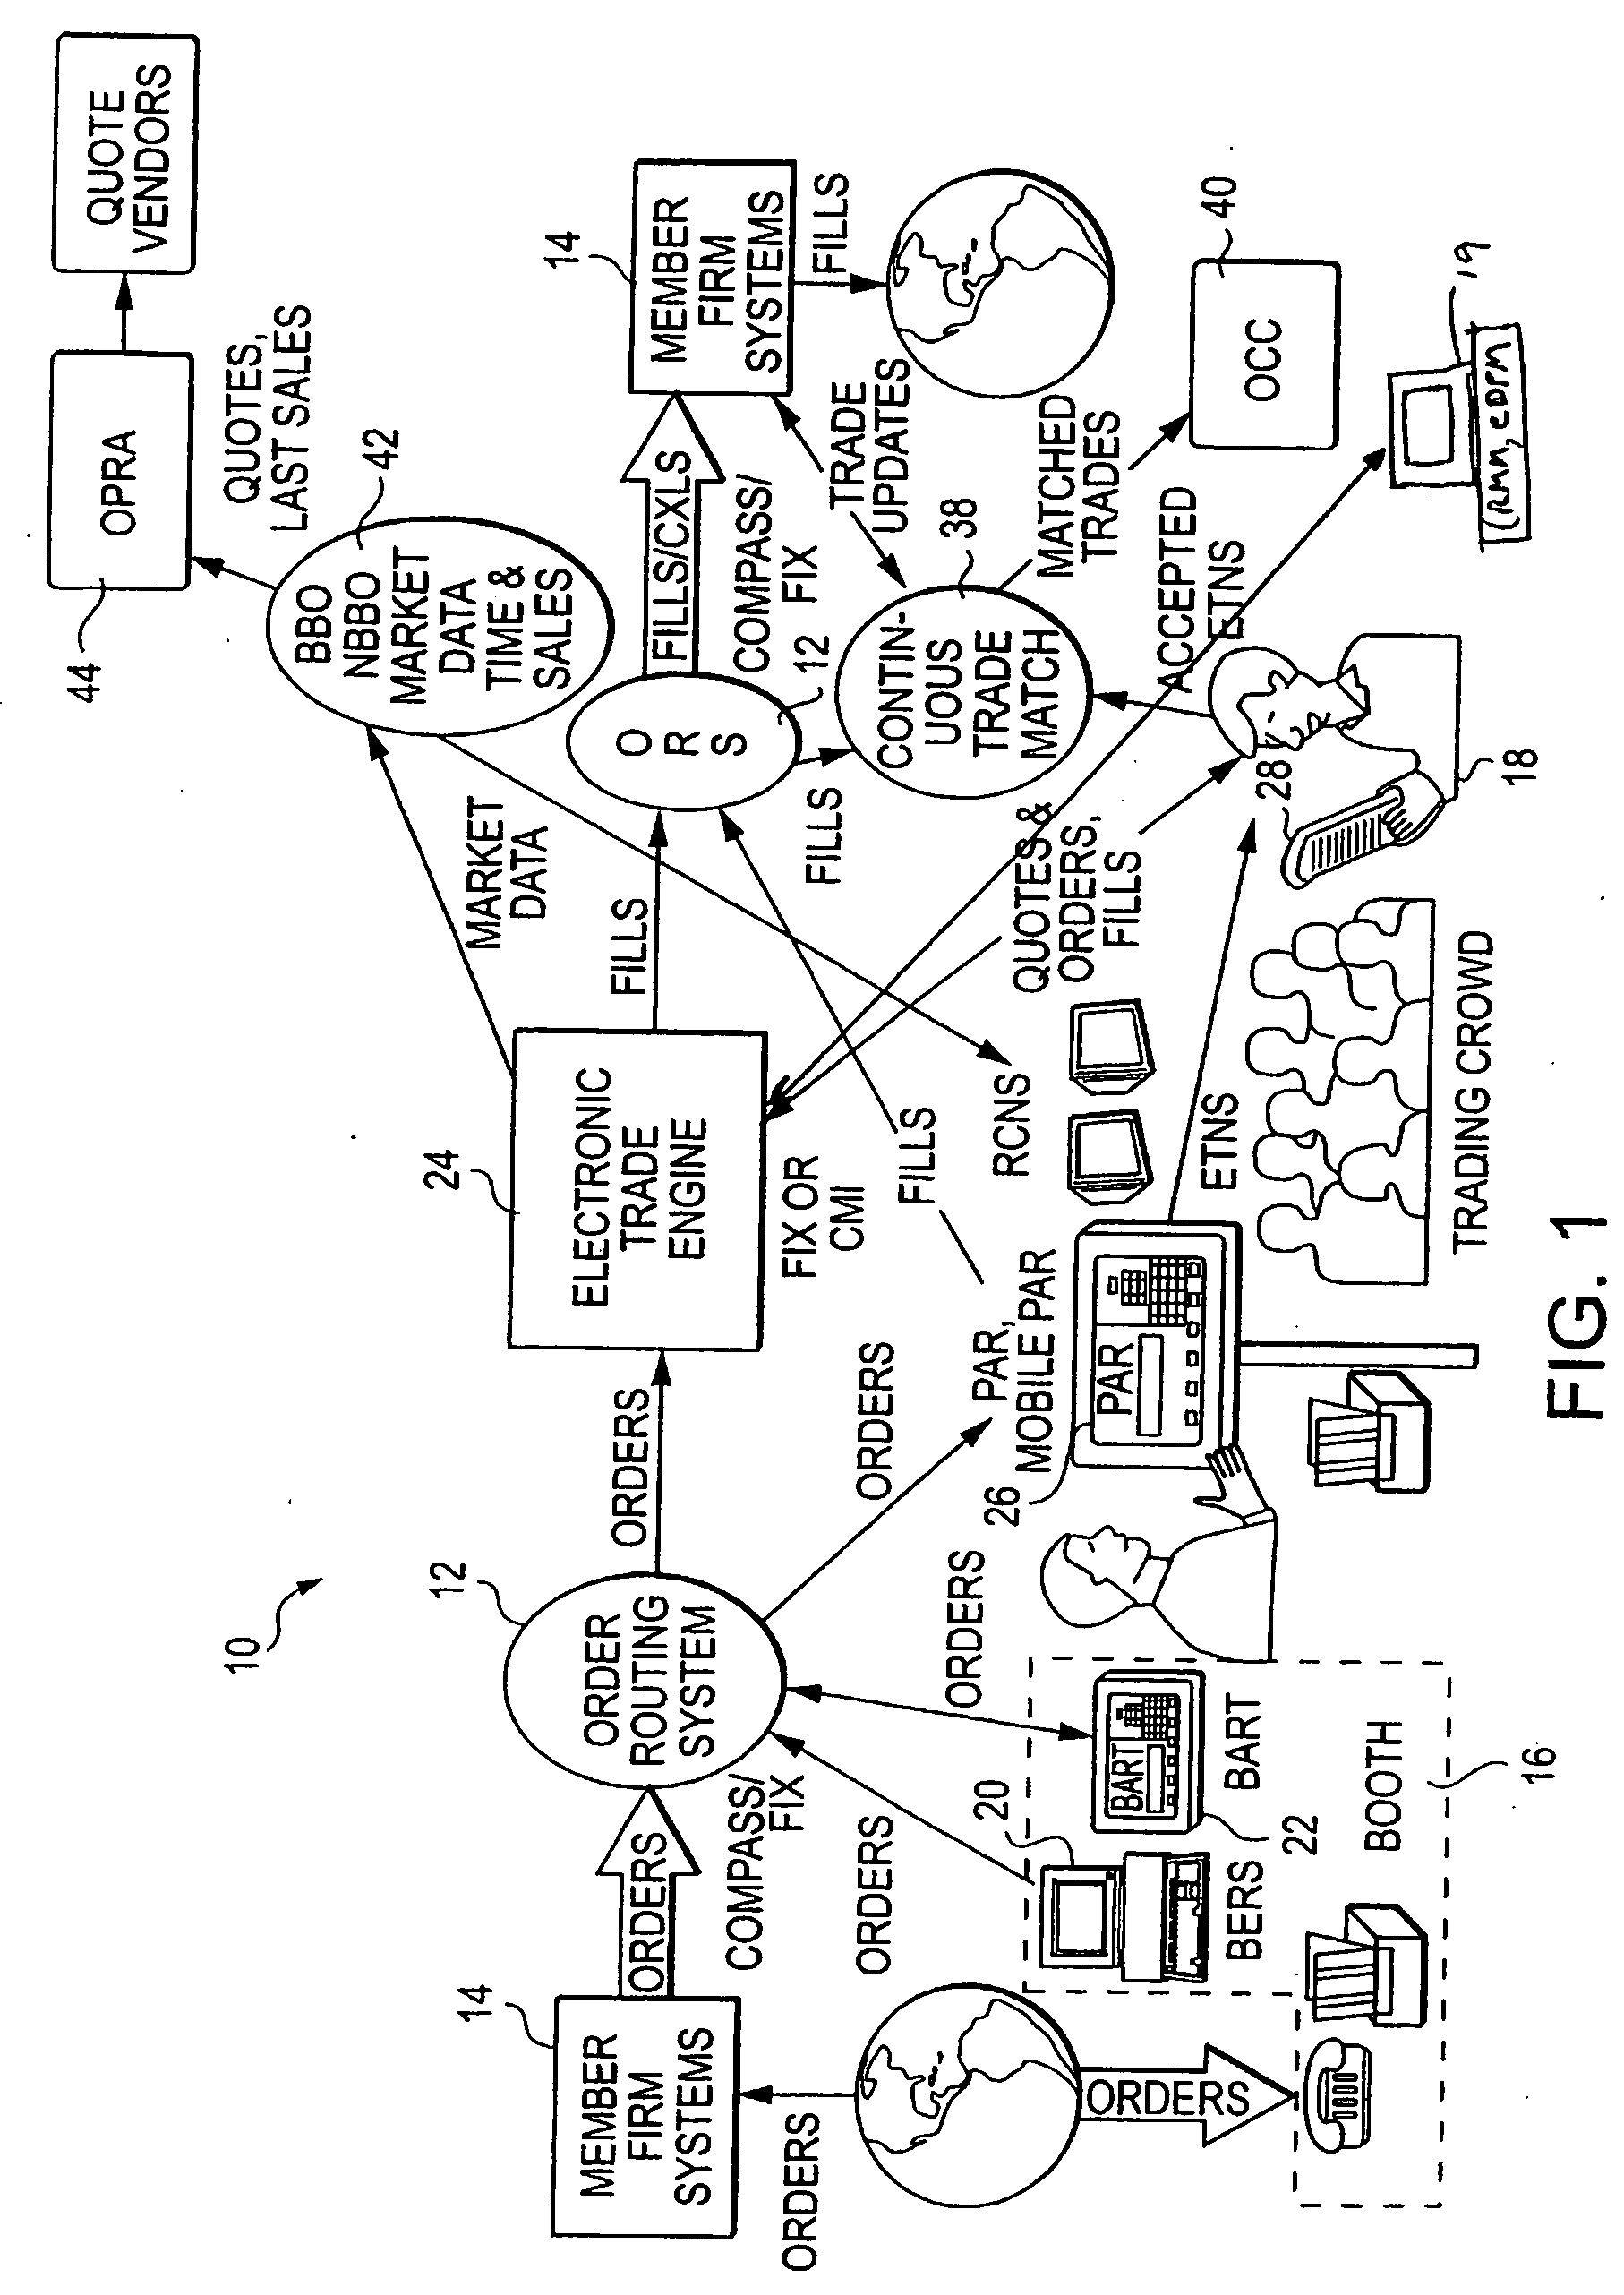 Hybrid trading system for concurrently trading through both electronic and open-outcry trading mechanisms